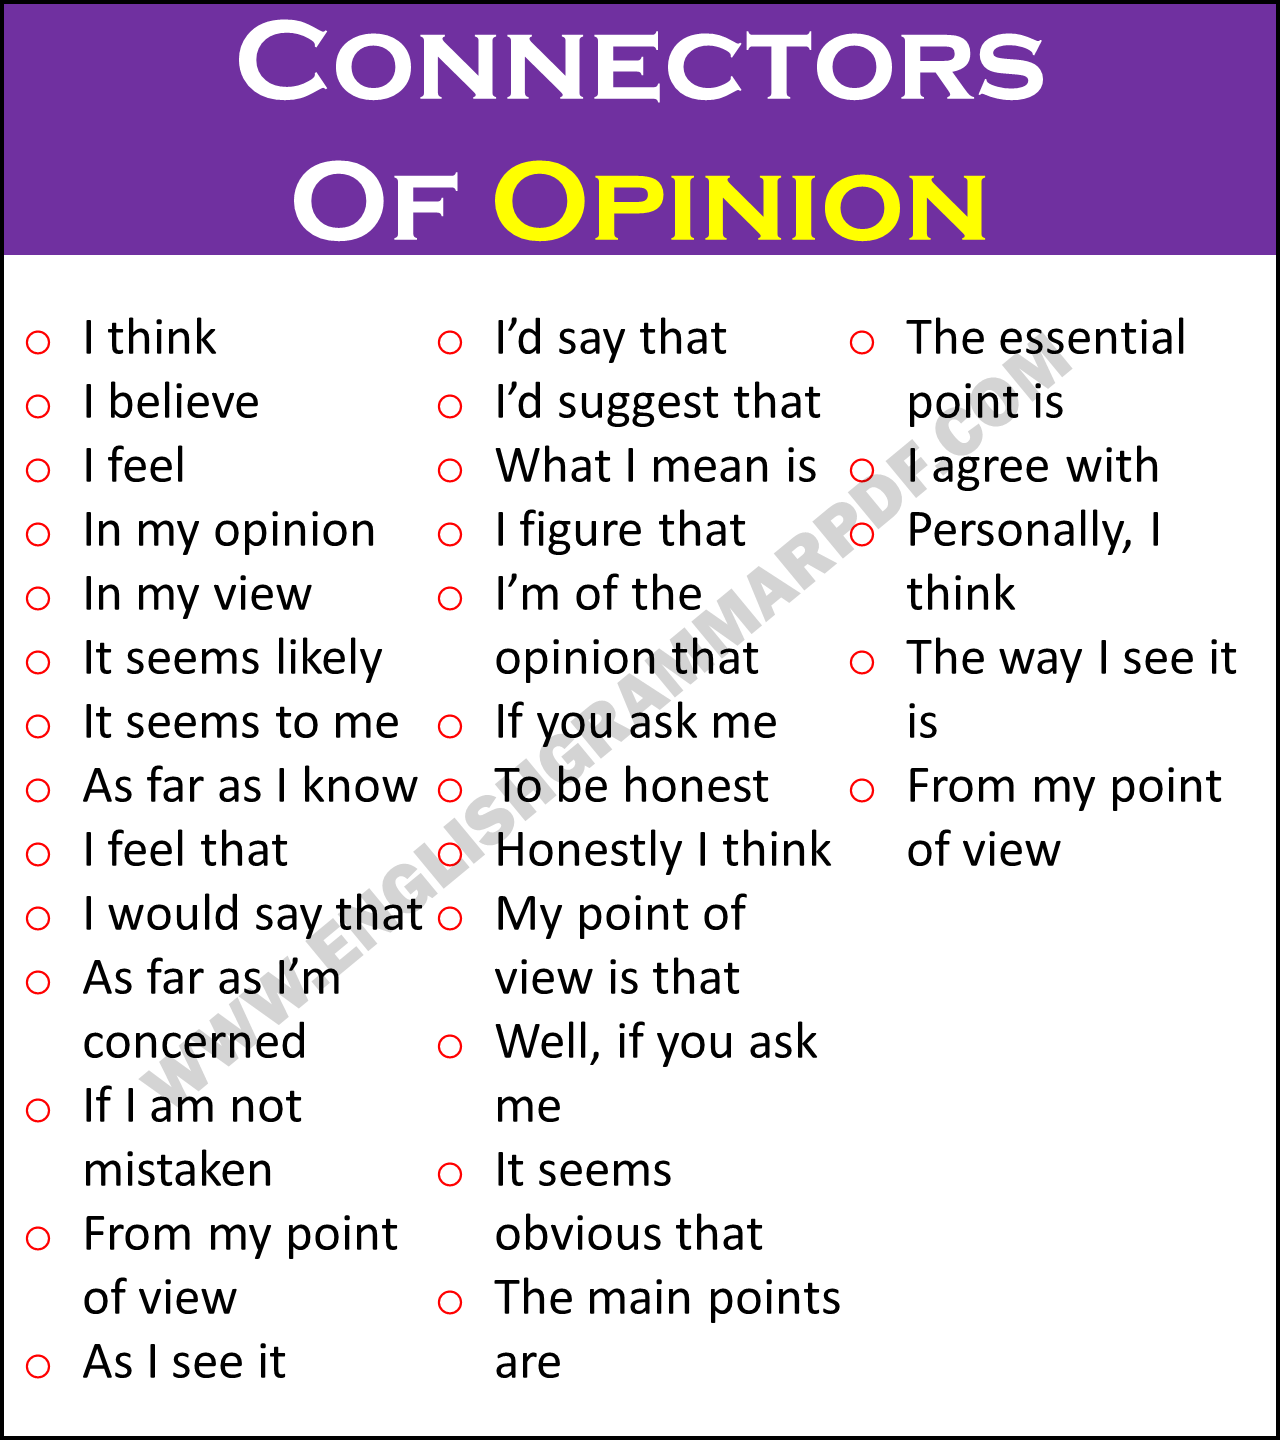 Connectors of Opinion